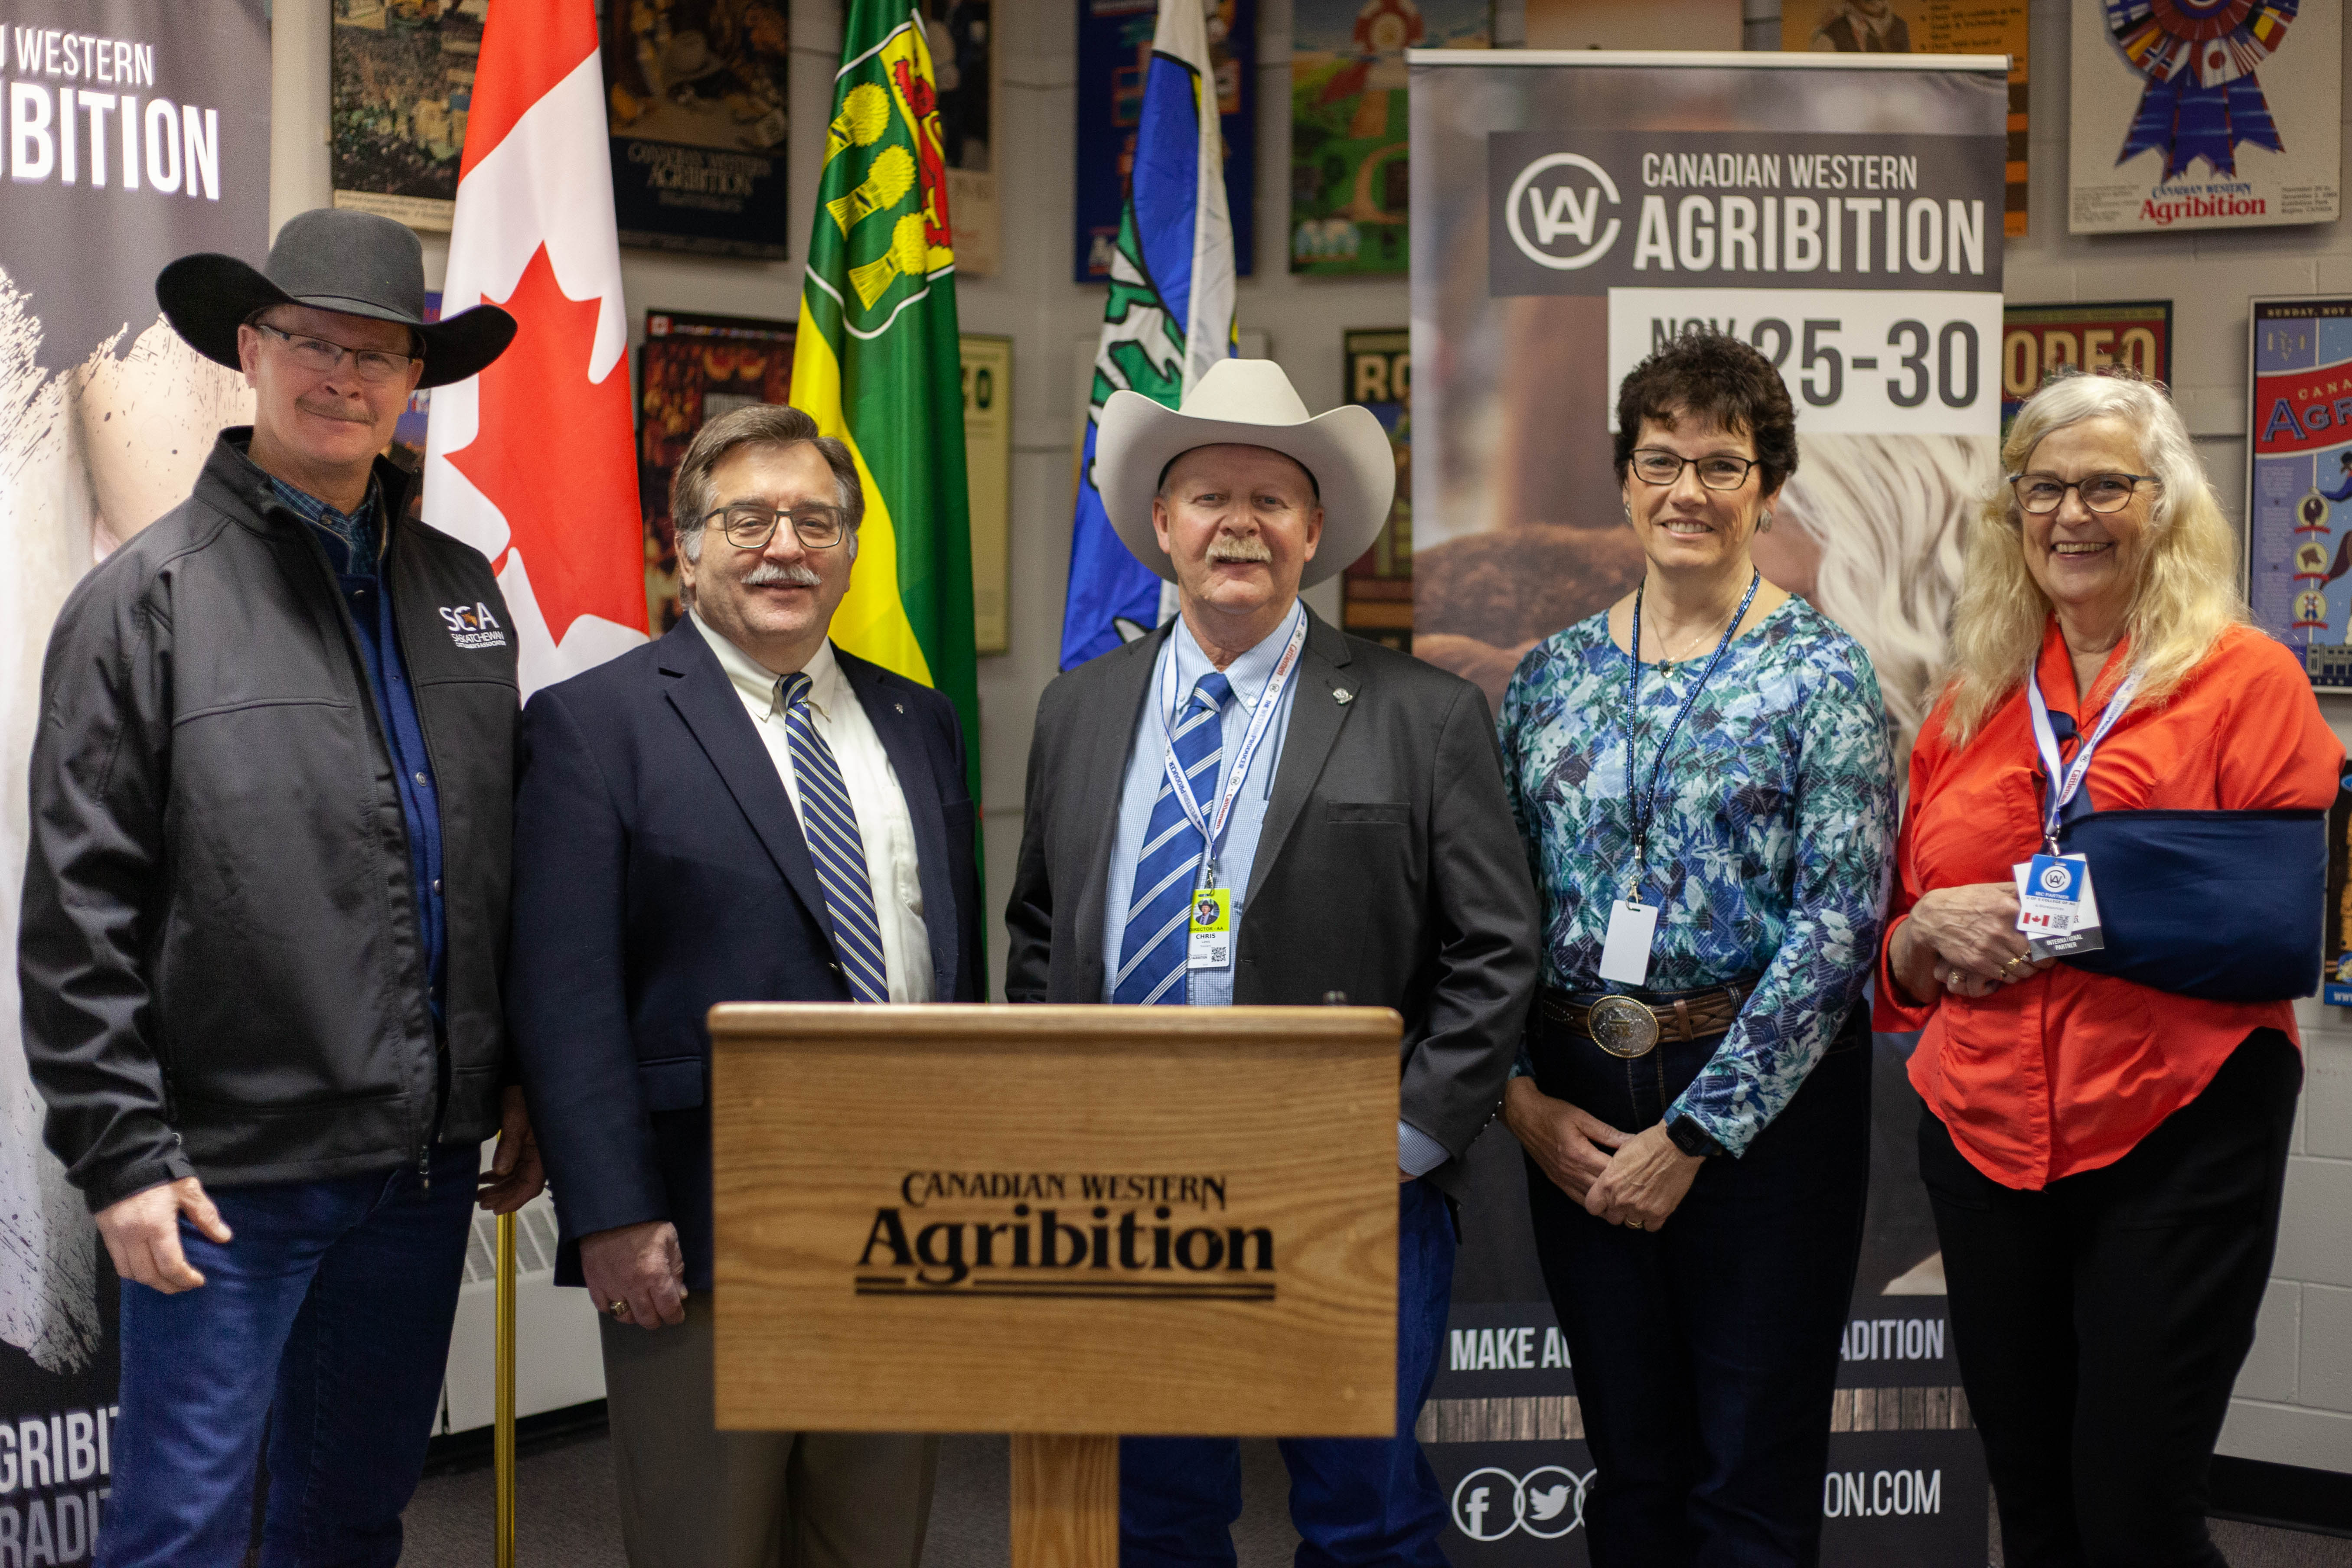 Duane Thompson, chair of LFCE Strategic Advisory Board, Dr. Douglas Freeman, Dean of the Western College of Veterinary Medicine, Chris Lees, president of Western Canadian Agribition, Kim Hextall, vice-president of CWA, Dr. Mary Buhr (PhD), Dean of the College of Agriculture and Bioresources